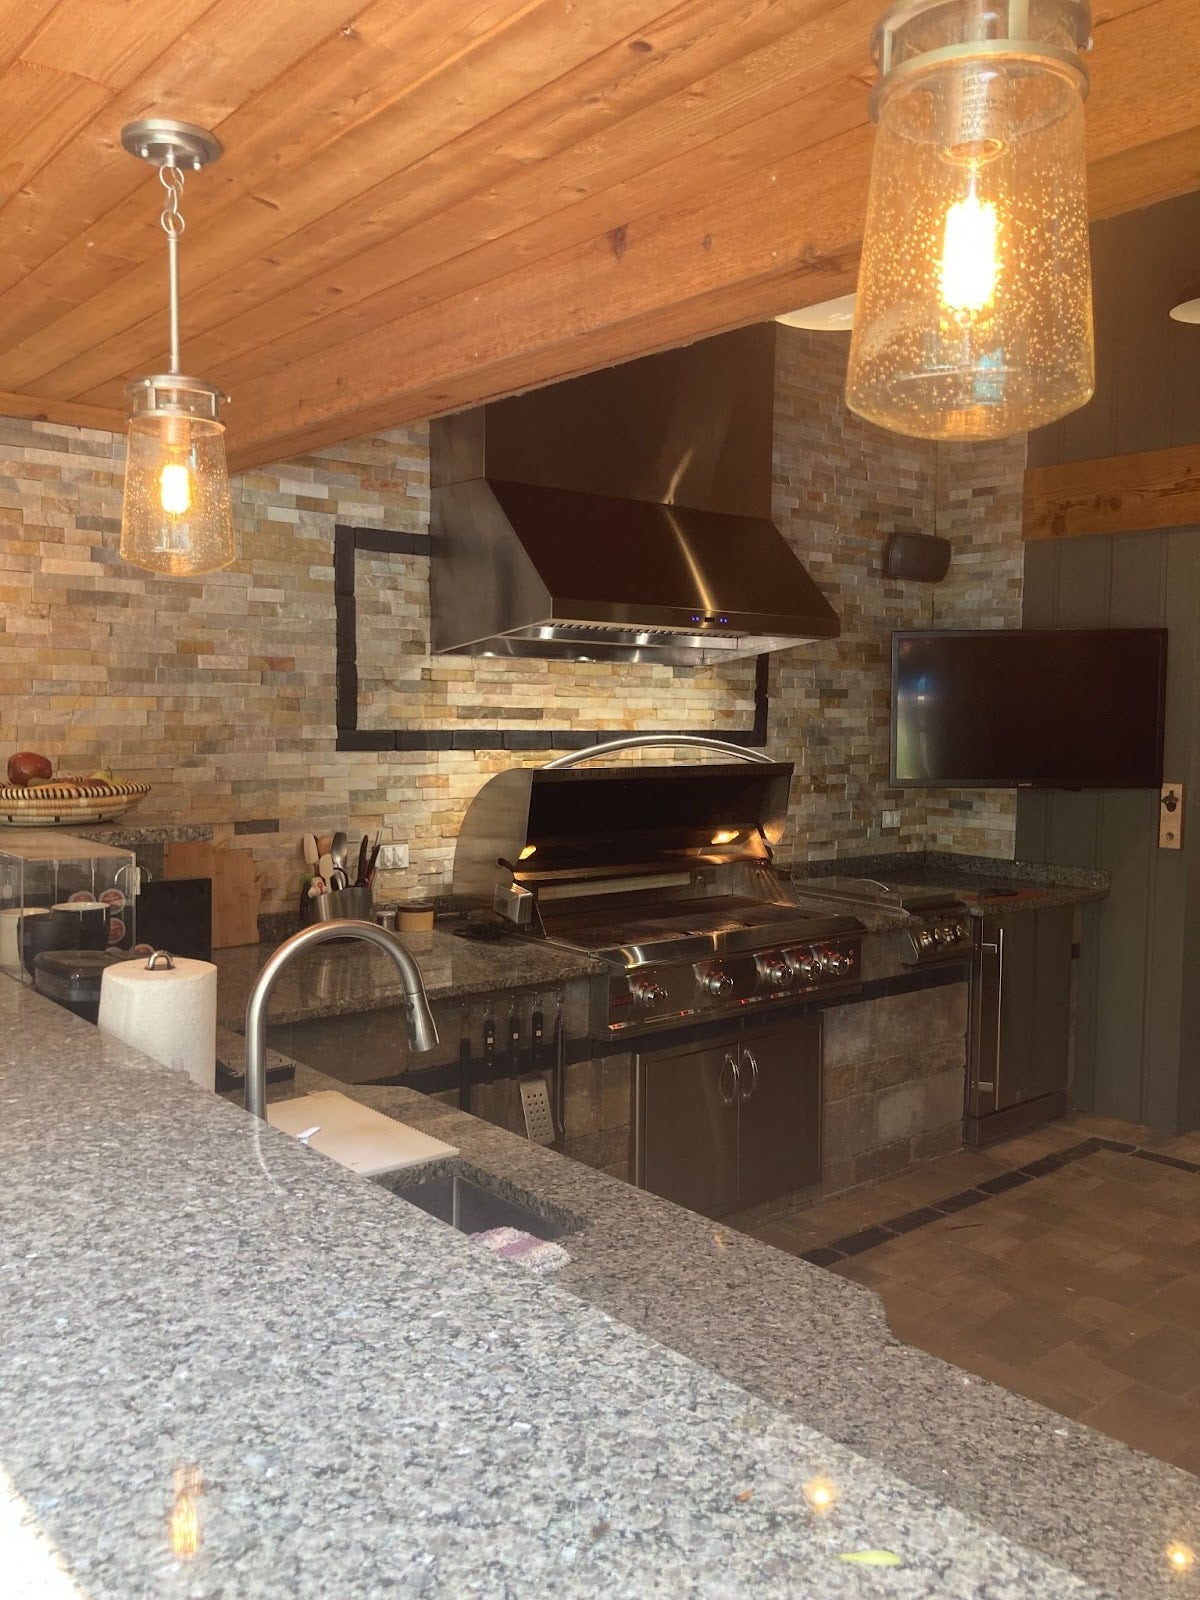 Rustic indoor kitchen with exposed wooden beams and stone wall accents, featuring a stainless steel professional grill and range hood. - Proline Range Hoods - prolinerangehoods.com 